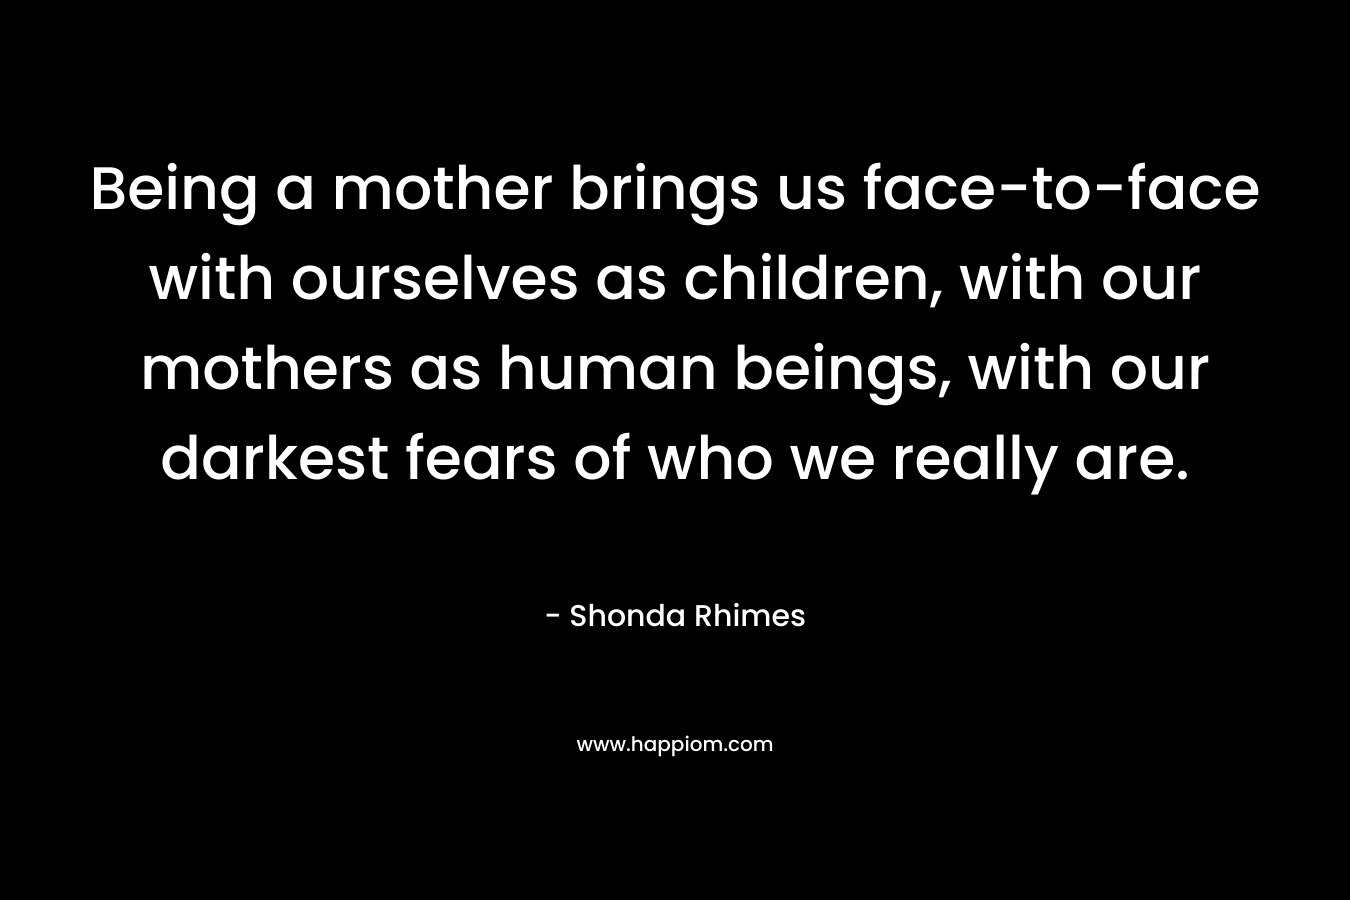 Being a mother brings us face-to-face with ourselves as children, with our mothers as human beings, with our darkest fears of who we really are. – Shonda Rhimes